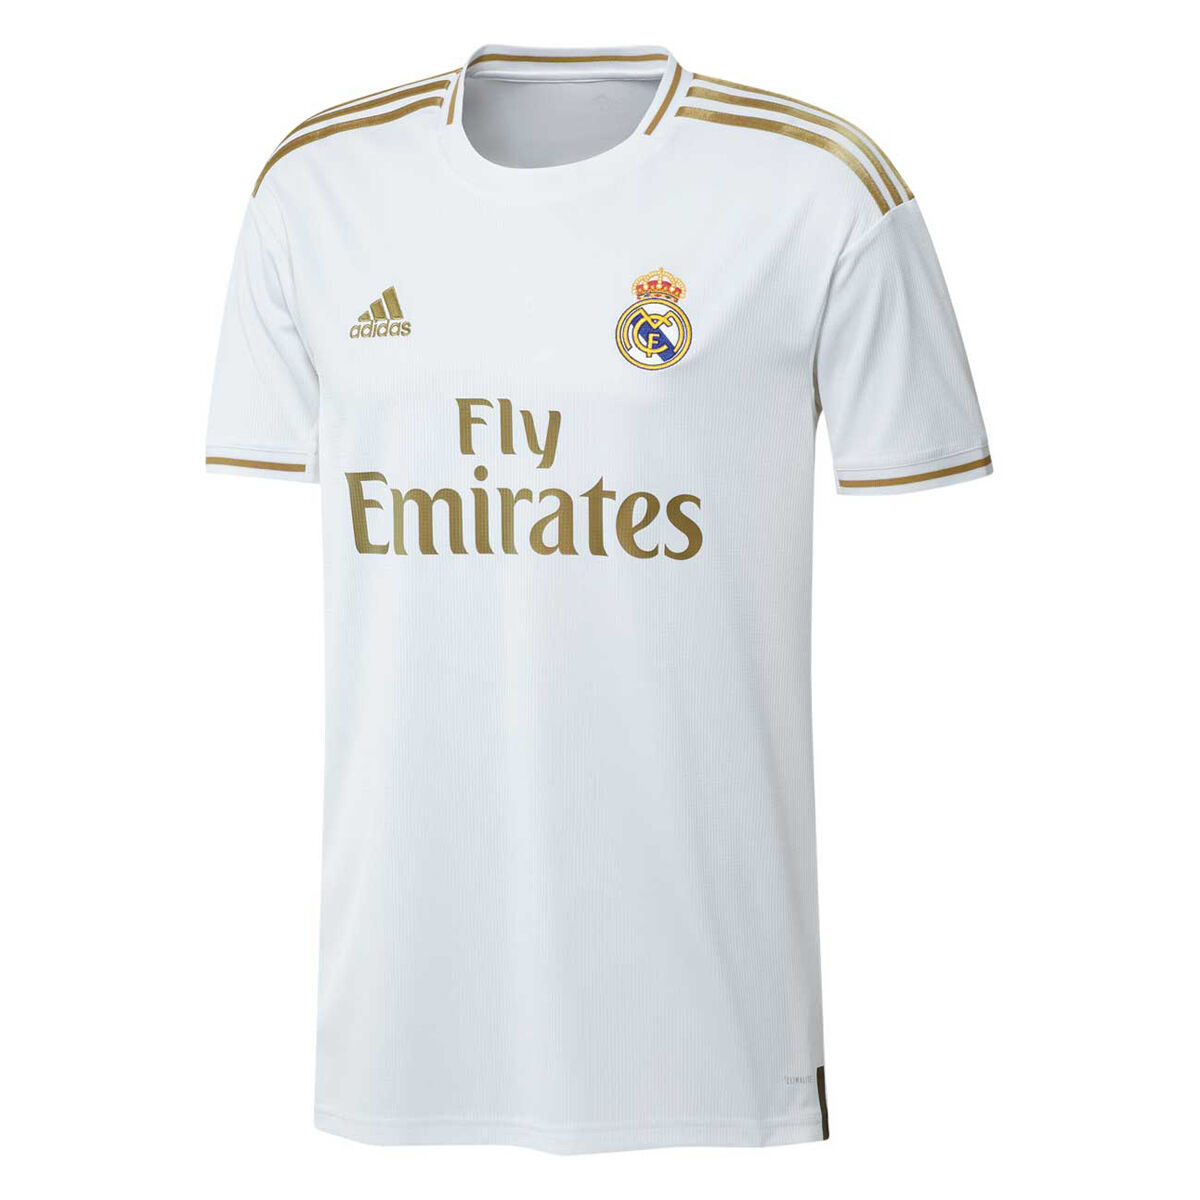 fly emirates jersey white and gold